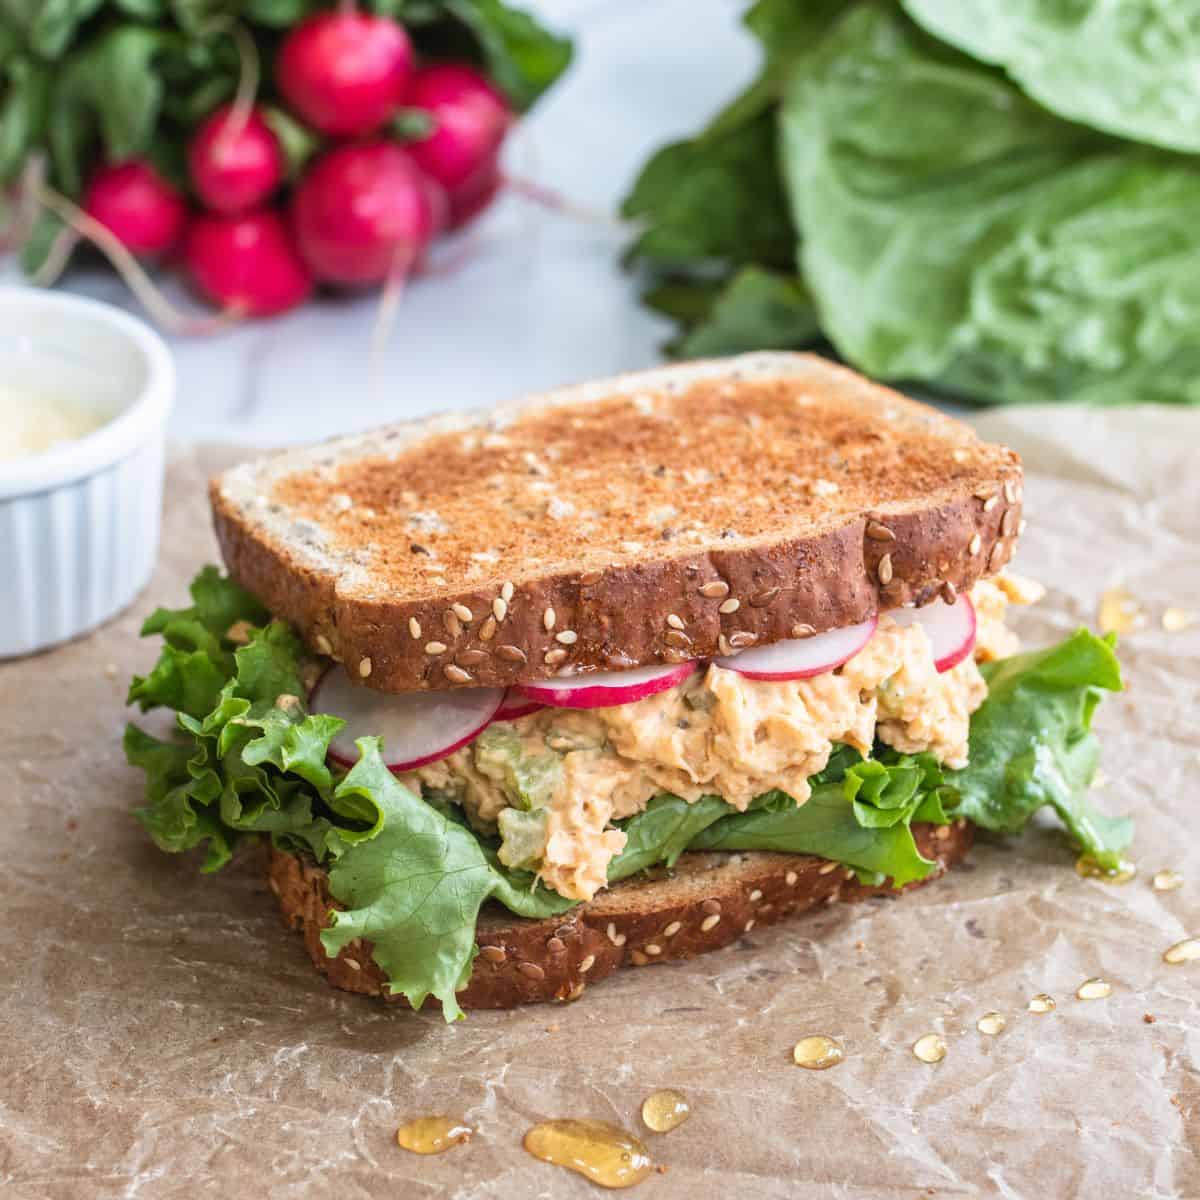 Chickpea smash sandwich with radishes and lettuce leaves showing.